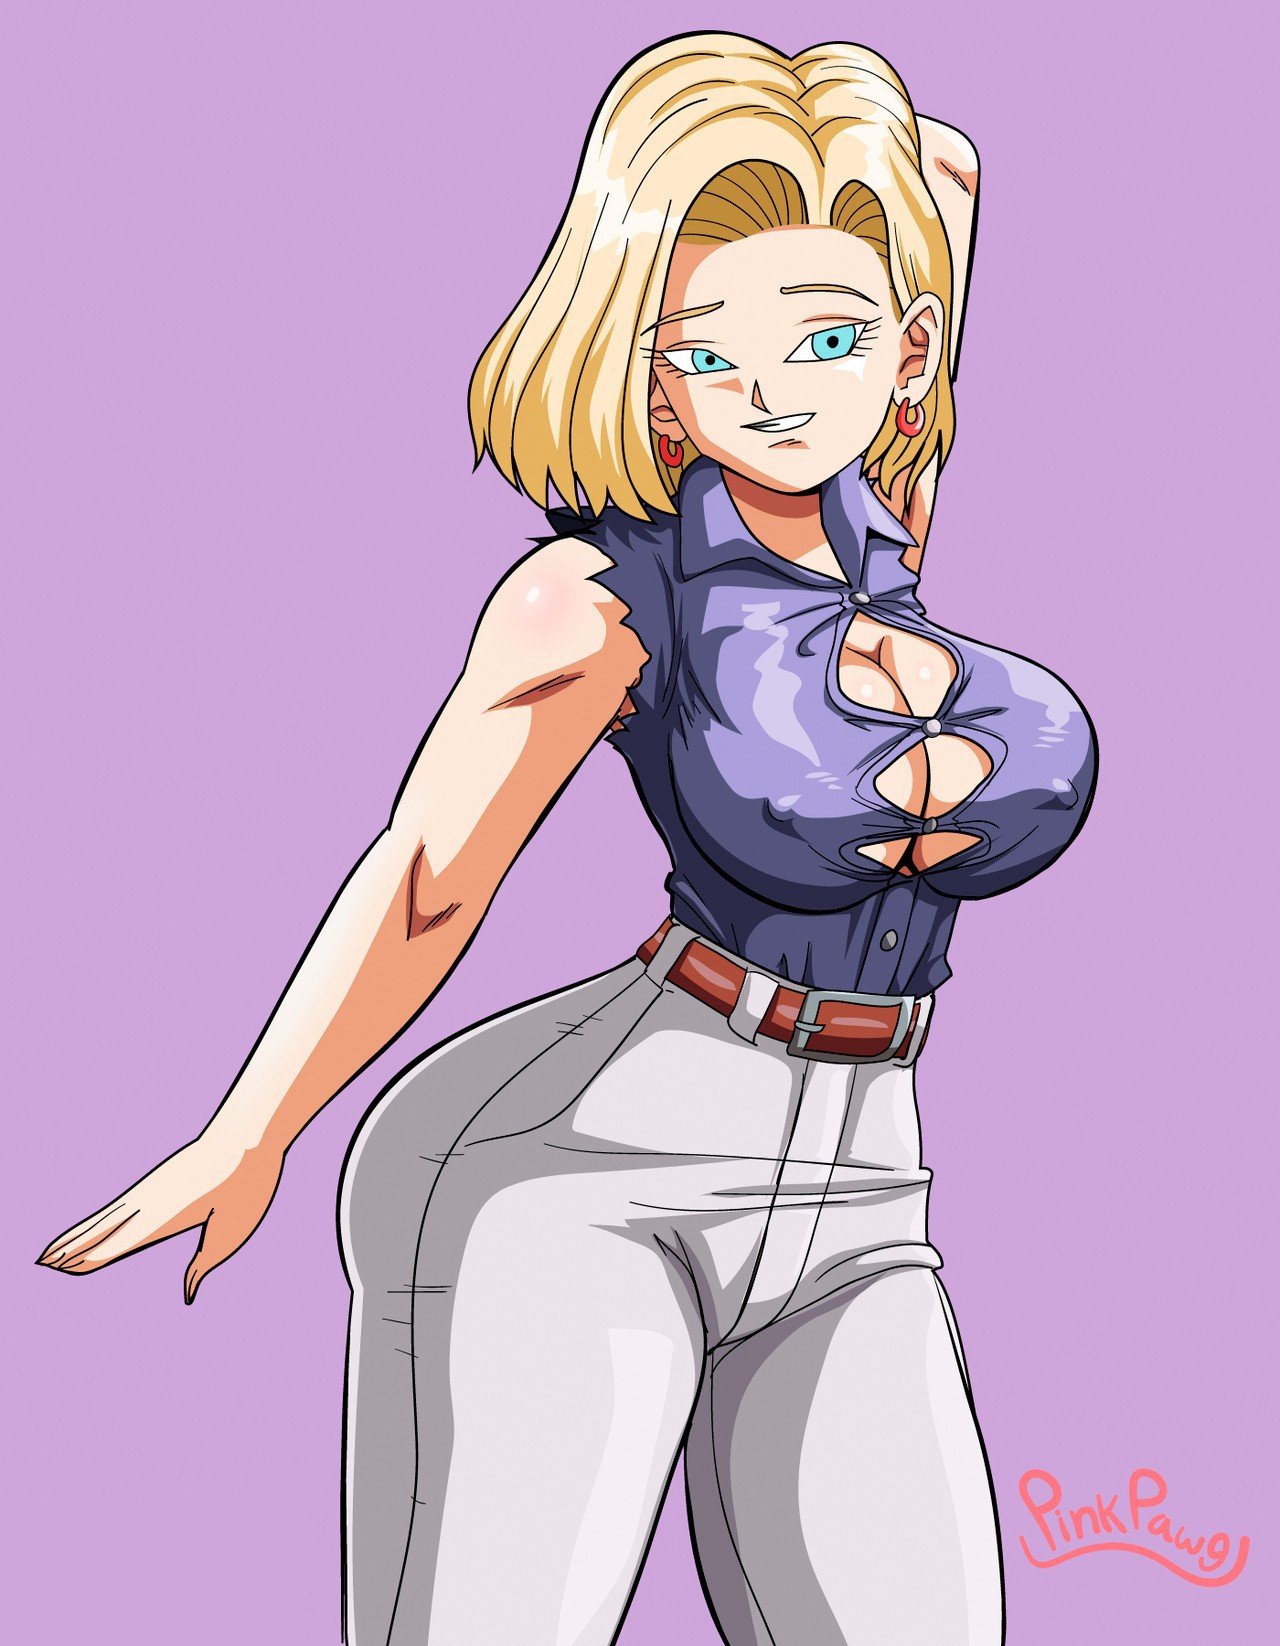 Android 18 is Alone - 7